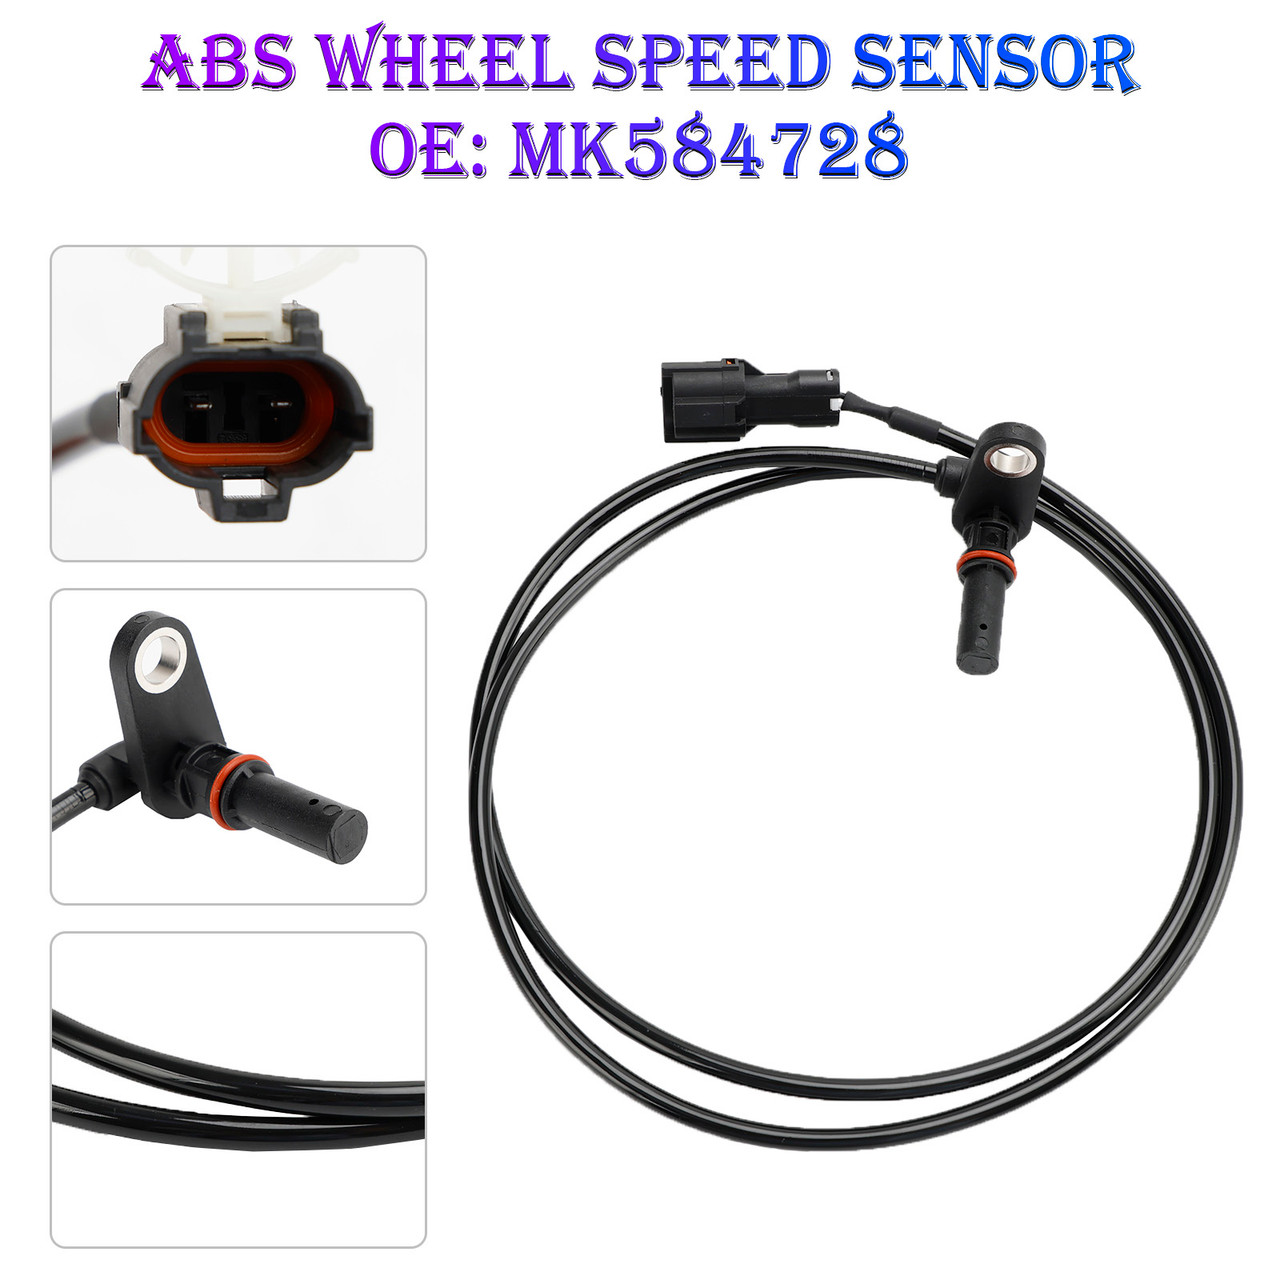 ABS Wheel Speed Sensor Front Right For Mitsubishi Fuso Canter 3.0 MK584728